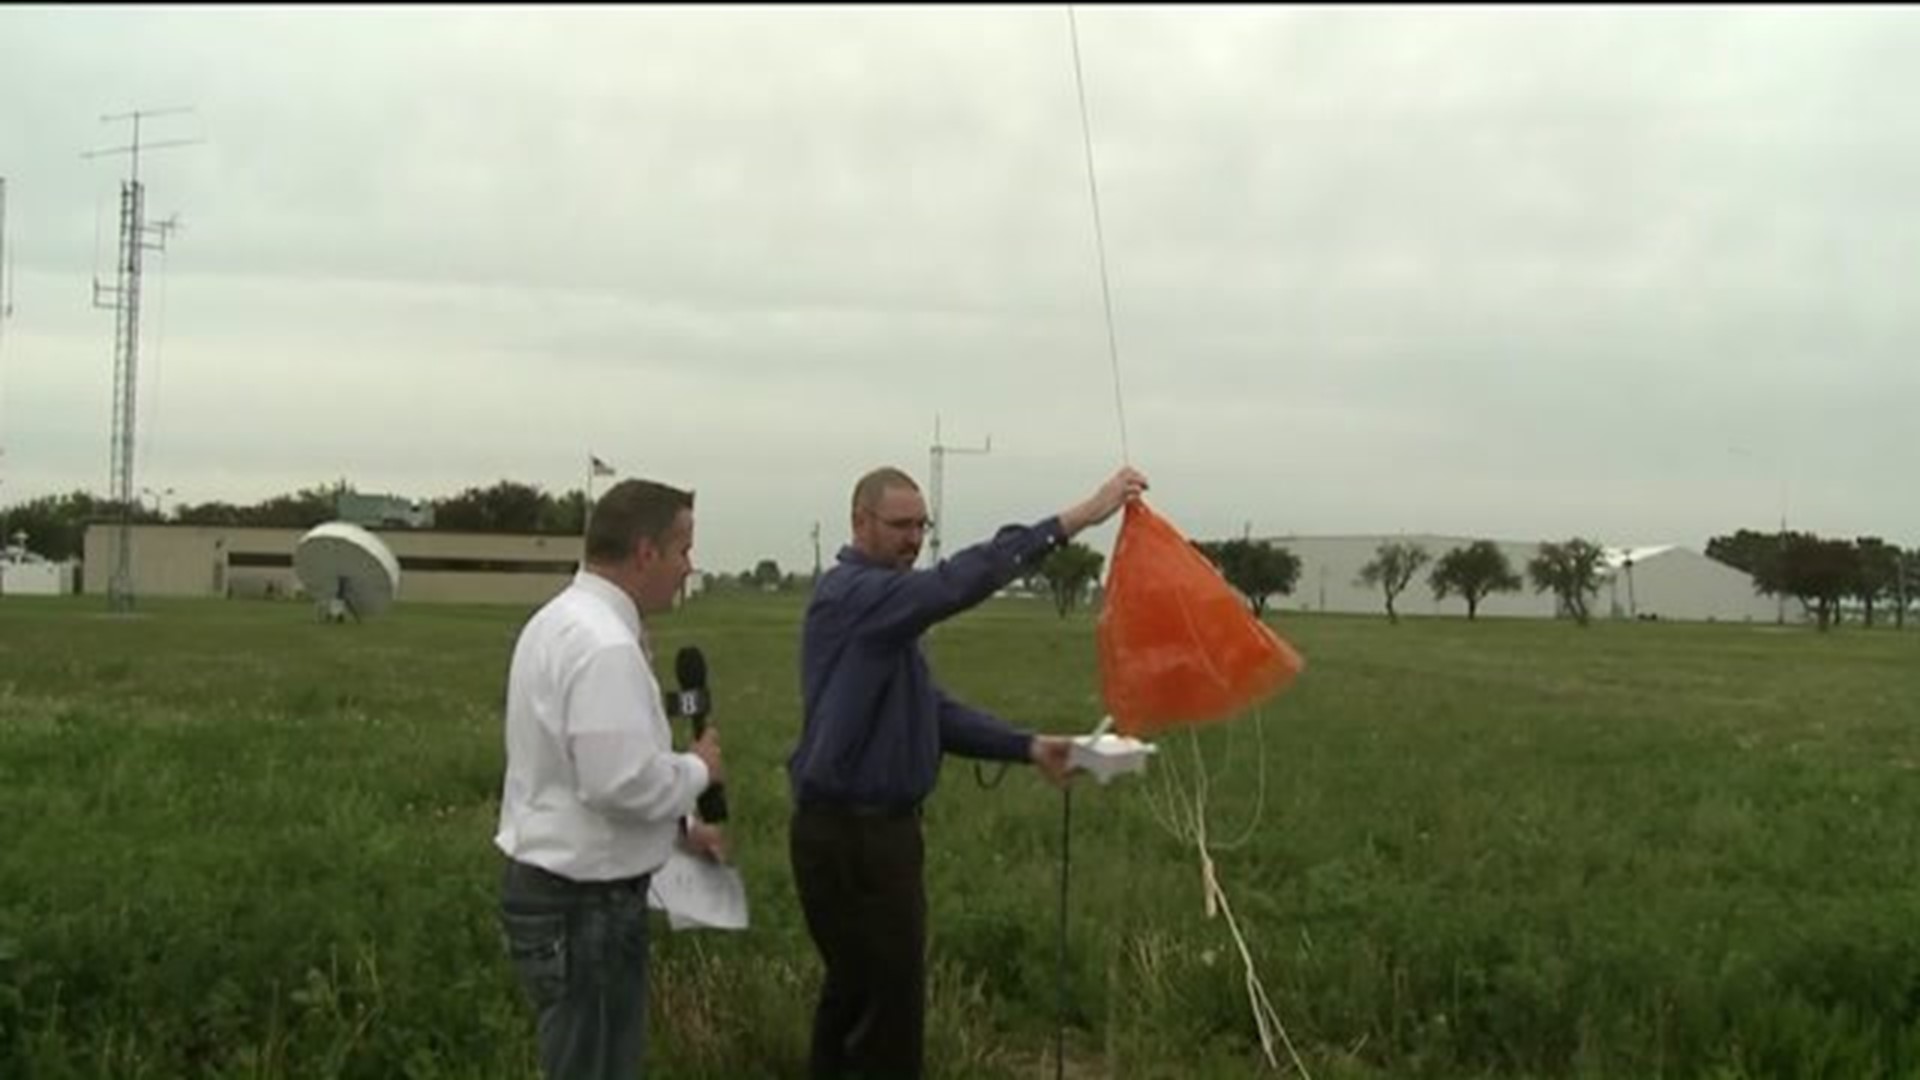 We launched a weather balloon on #GMQC